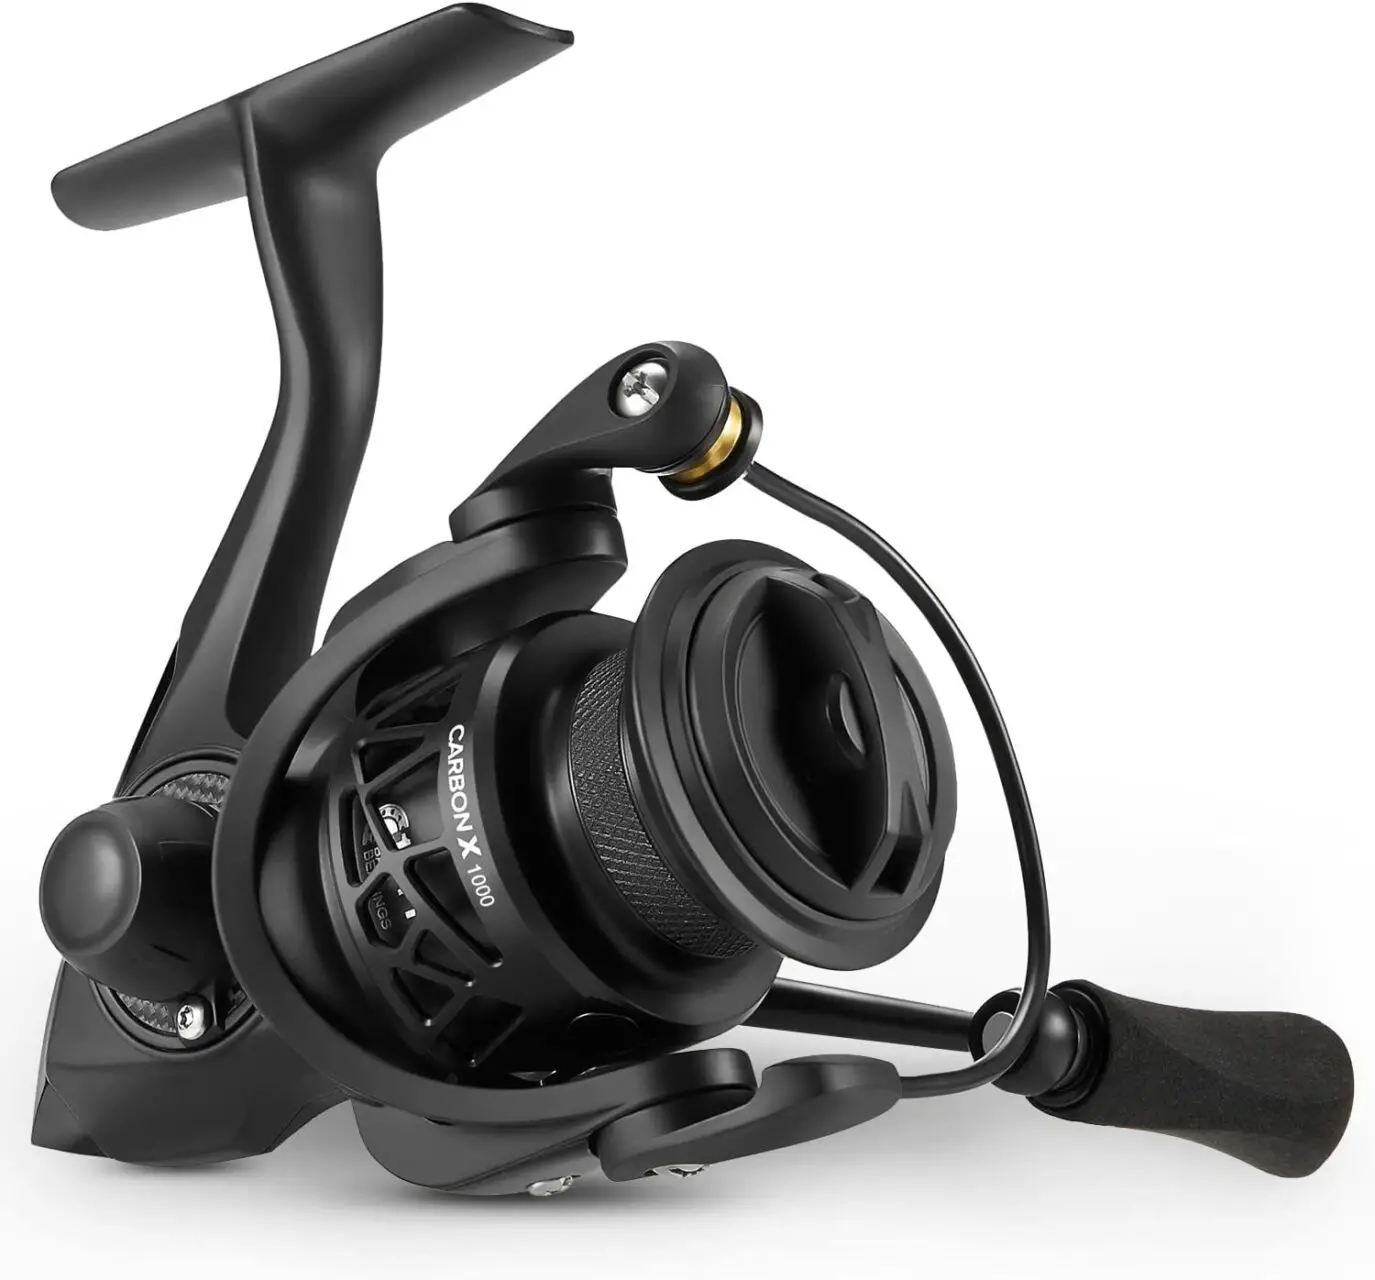 Piscifun Carbon X Spinning Reels: Best Ultralight Spinning Reel Review